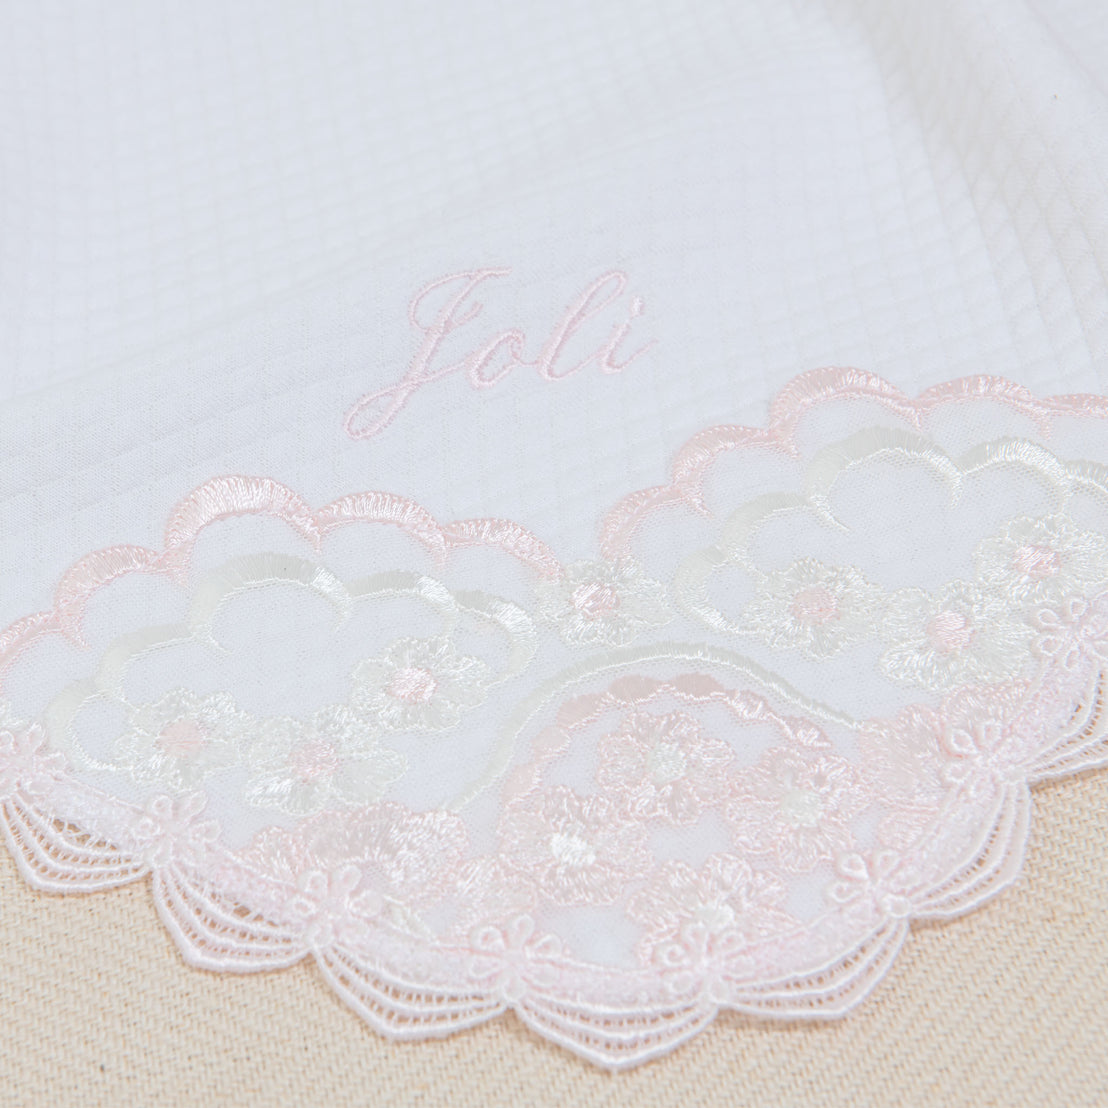 A close-up photo of a fabric with the embroidered name "Joli" in pink thread, partially overlaying an intricate white and pink lace design on a textured off-white background.